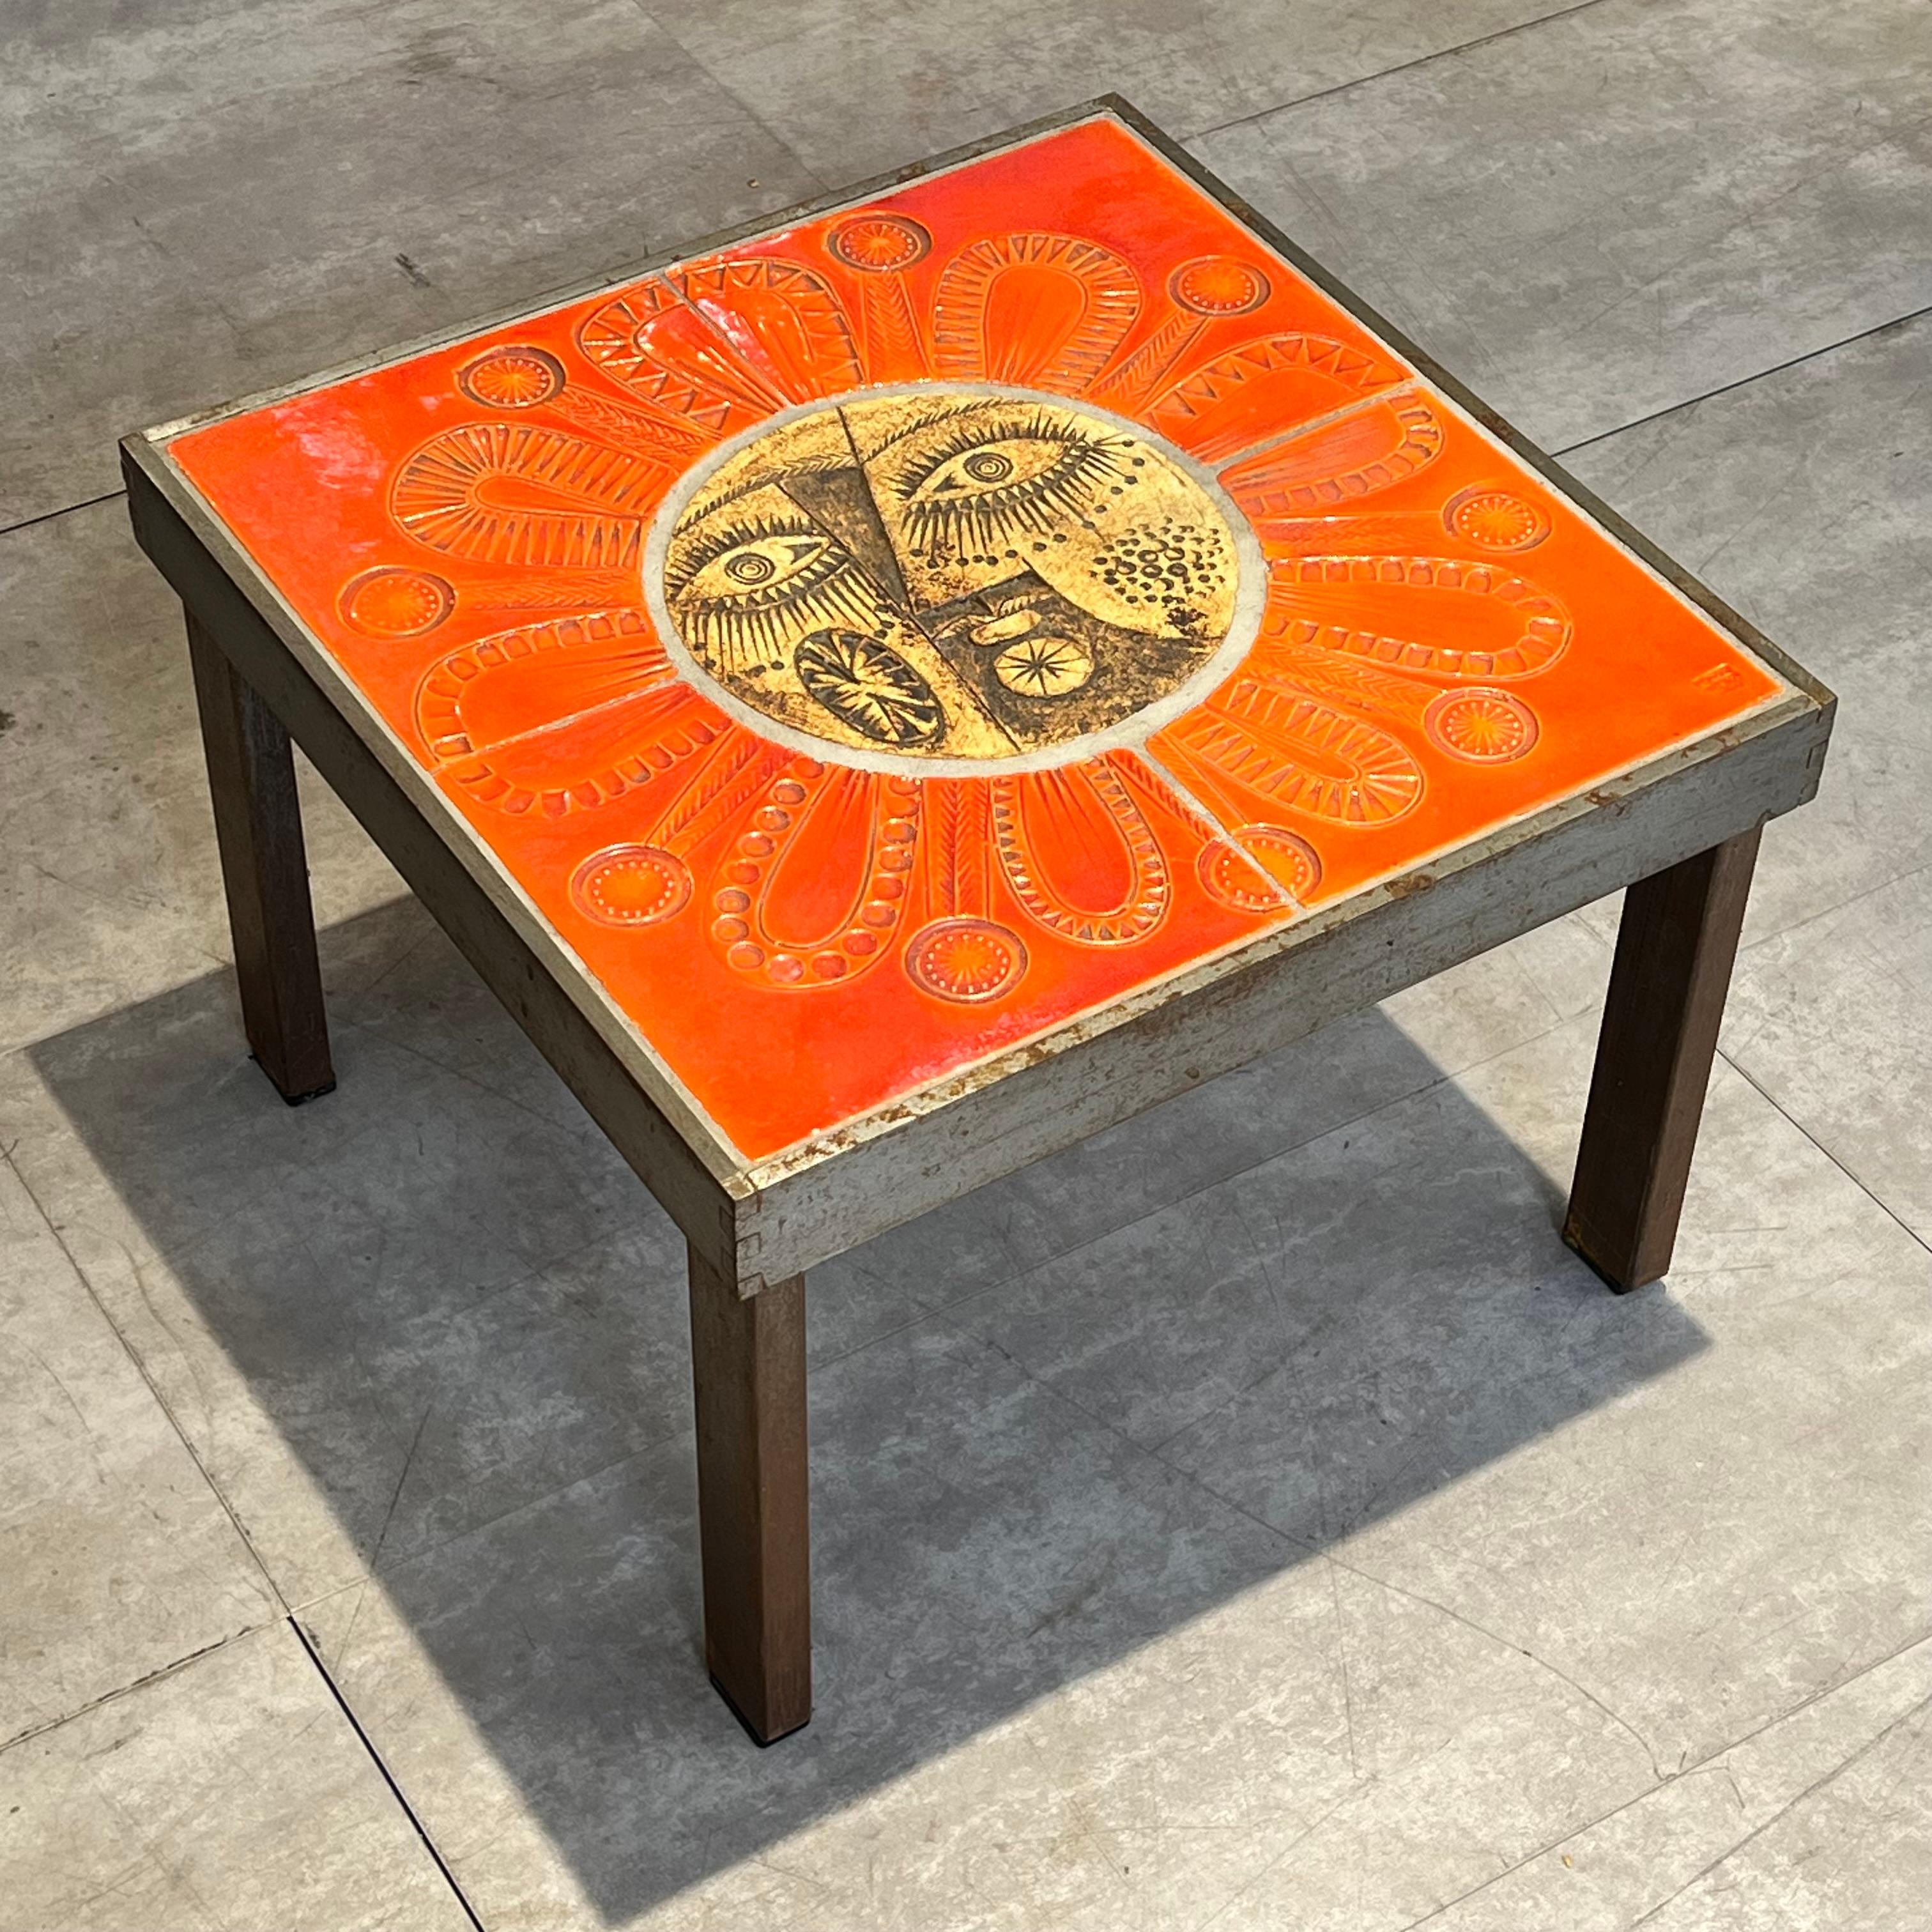 A very beautiful exemple of Roger Capron work, the sun table in ceramic

This side table was probably made with Jean Derval 

Around 1960s, vivid colors
Made in Vallauris, signed

Rare in the market